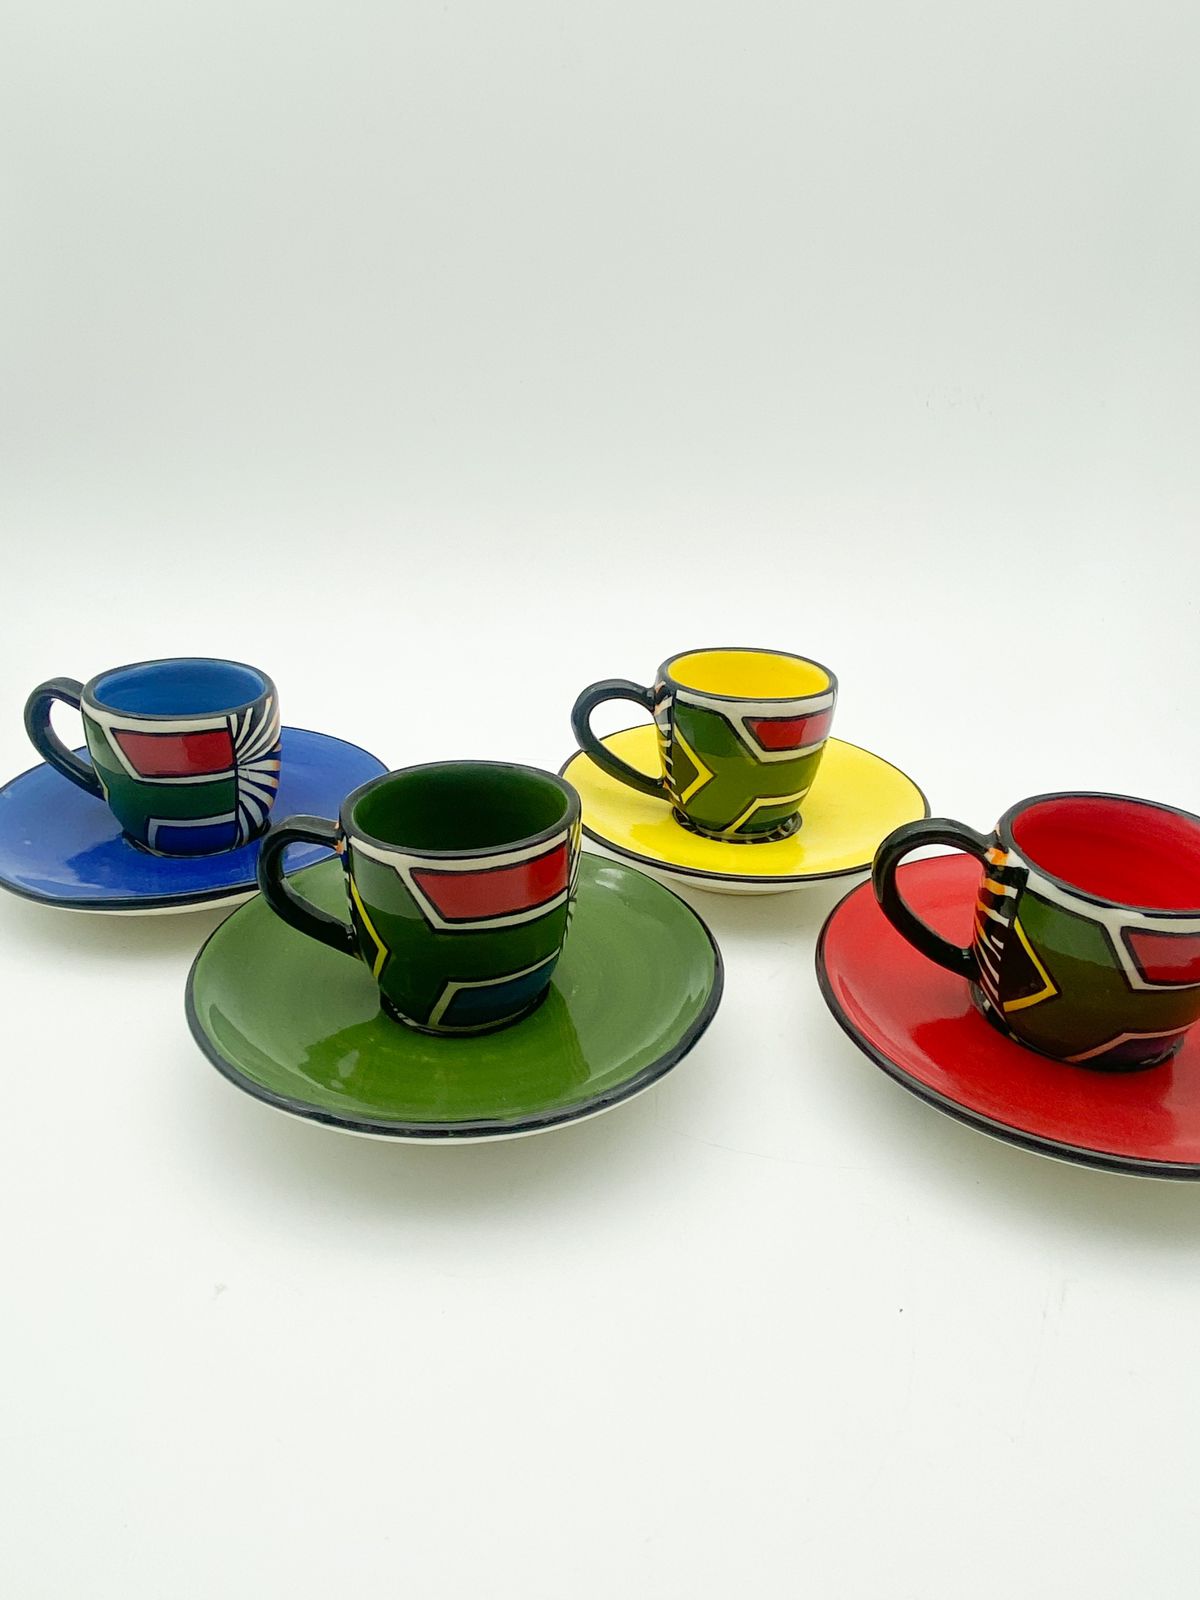 South African Espresso Cup & Saucer Red